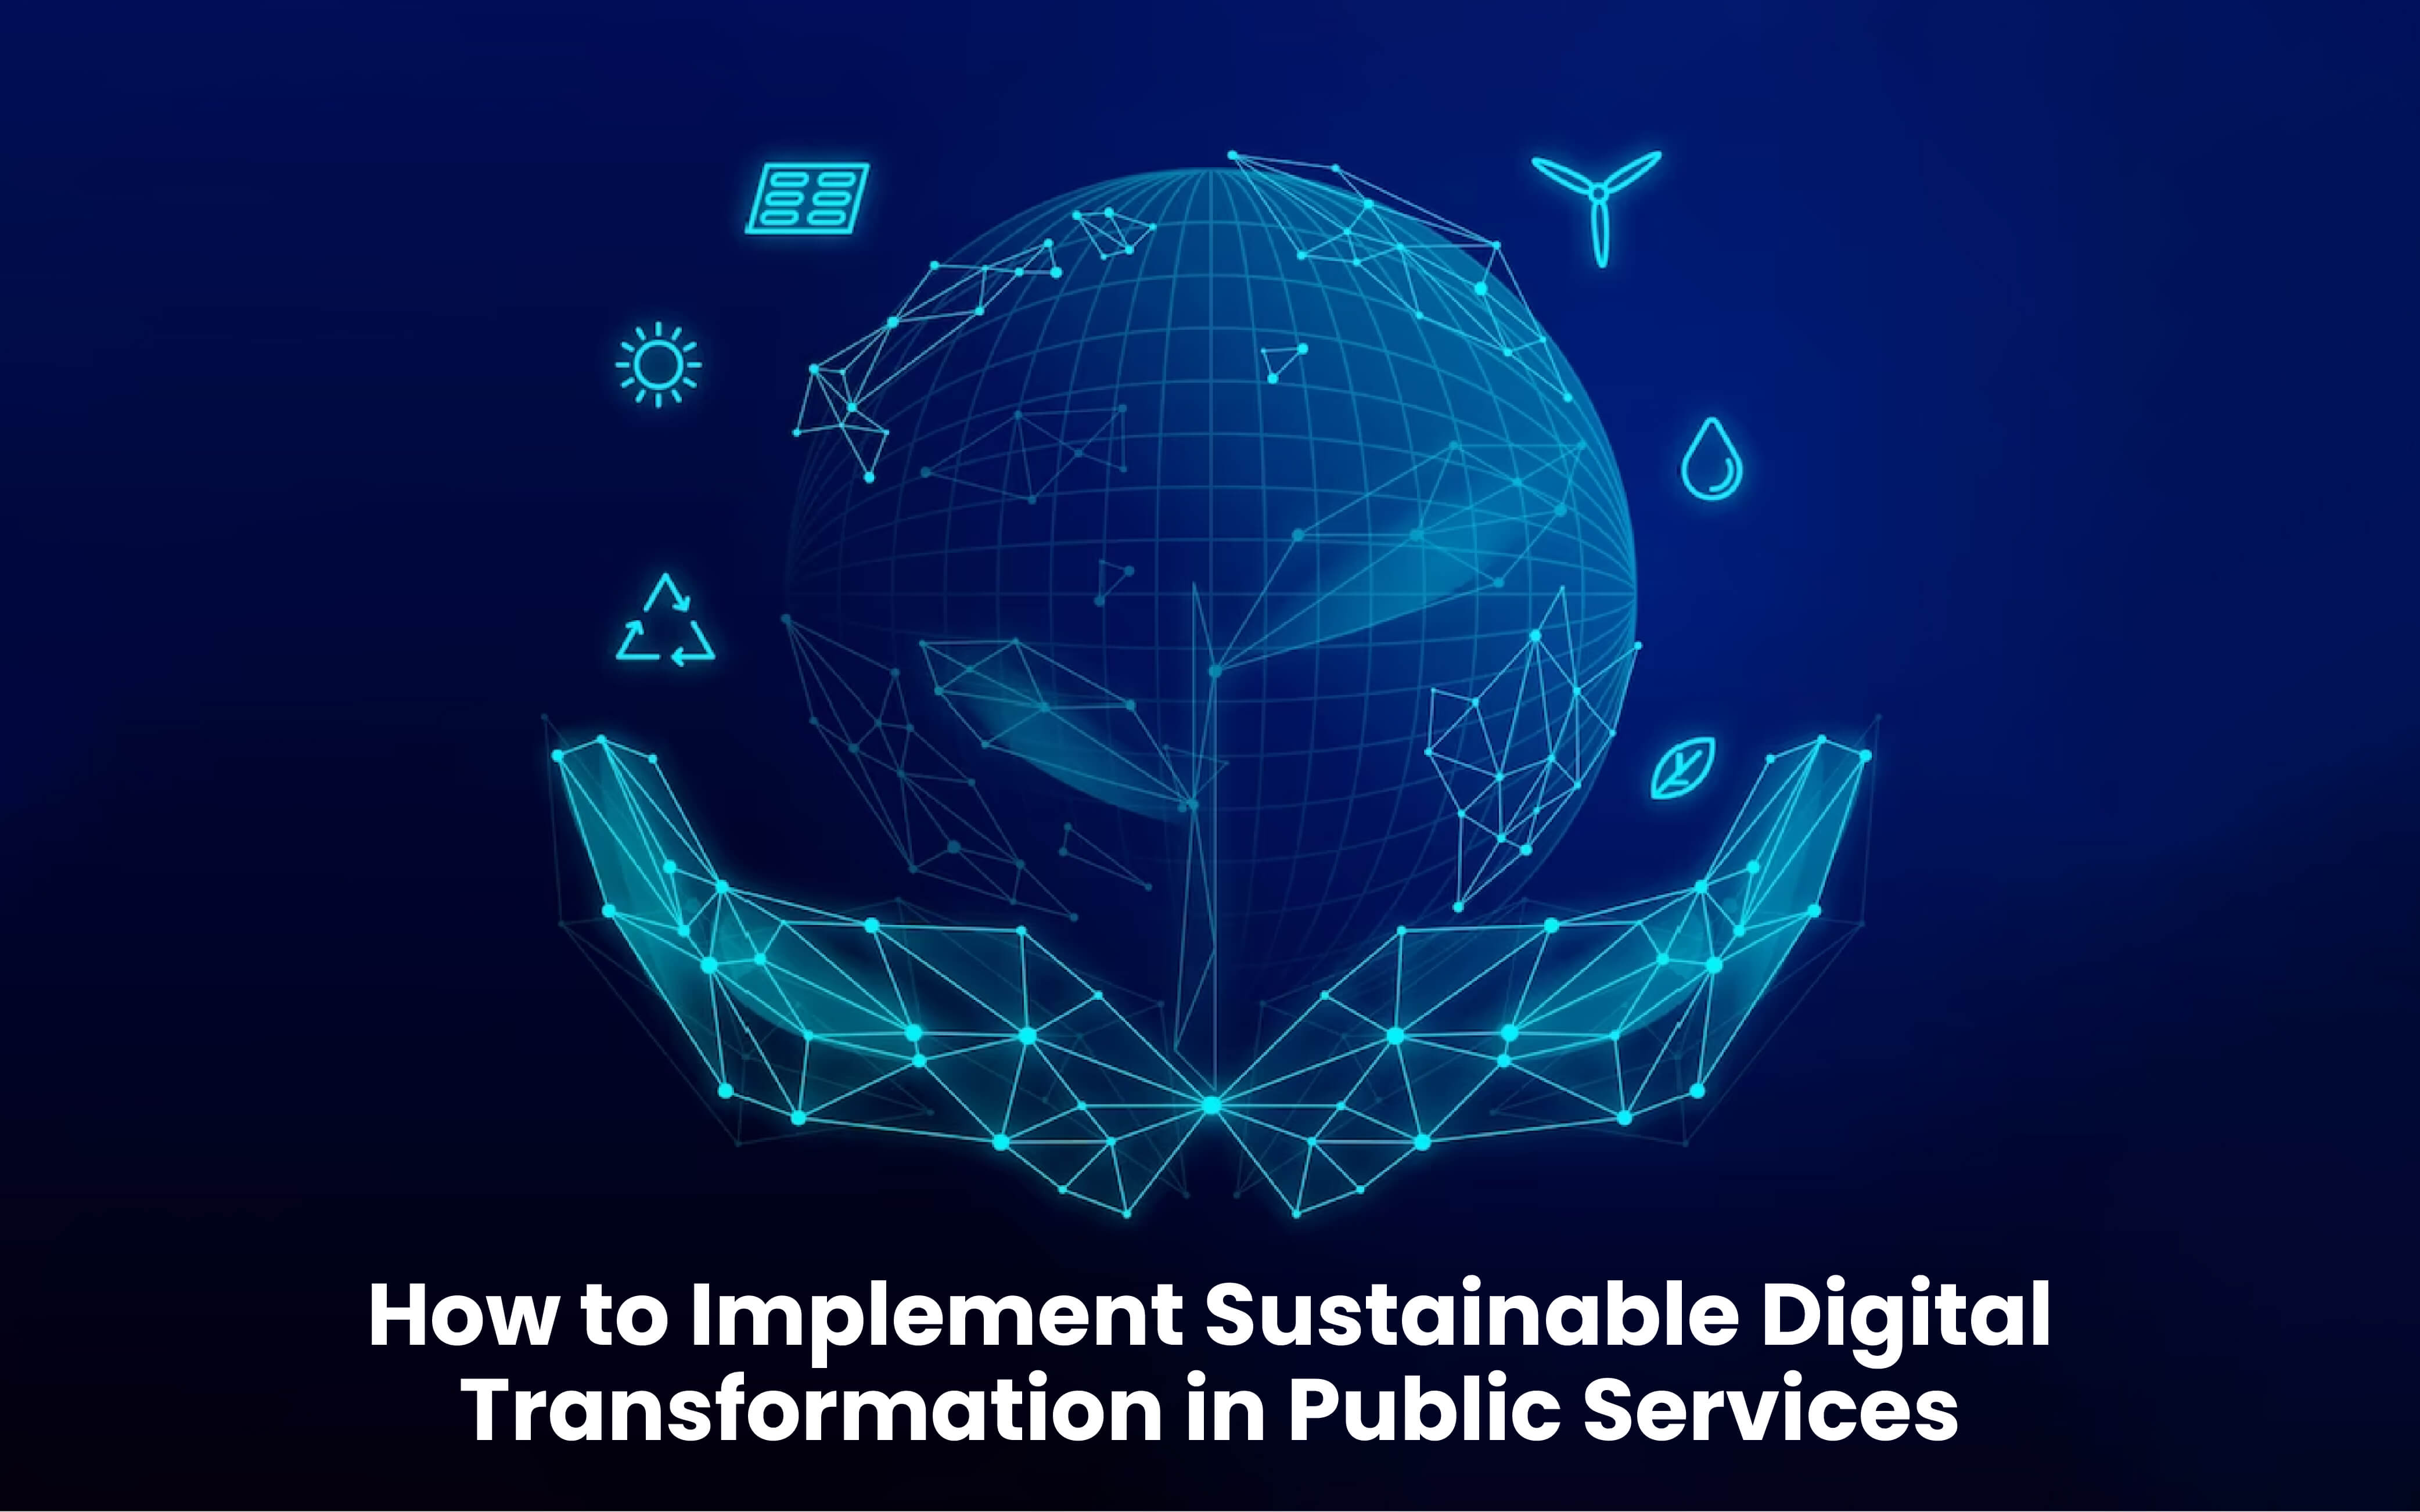 How to Implement Sustainable Digital Transformation in Public Services